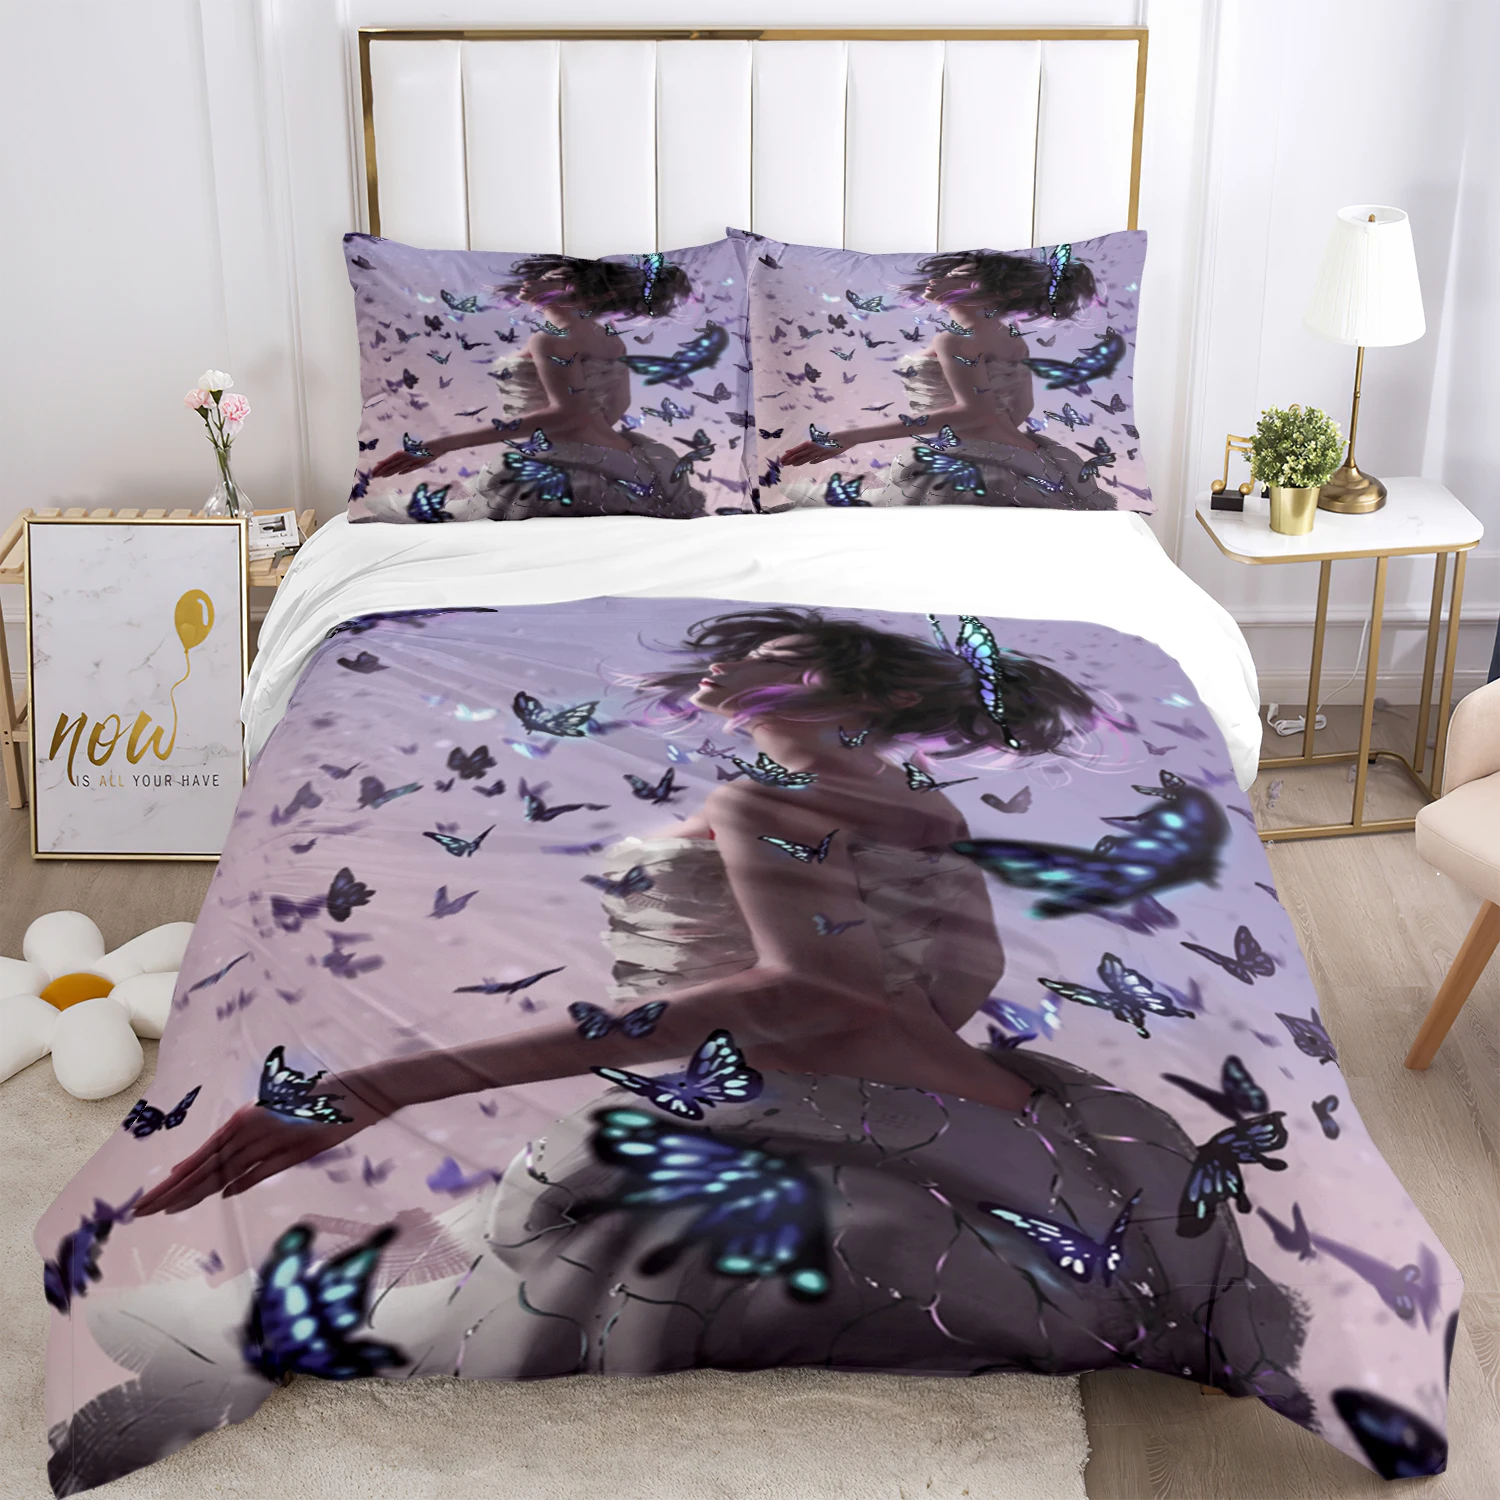 

Bivariate ghostblade Print Three Piece Bedding Set Fashion Article Children or Adults for Beds Quilt Covers Pillowcases Gift